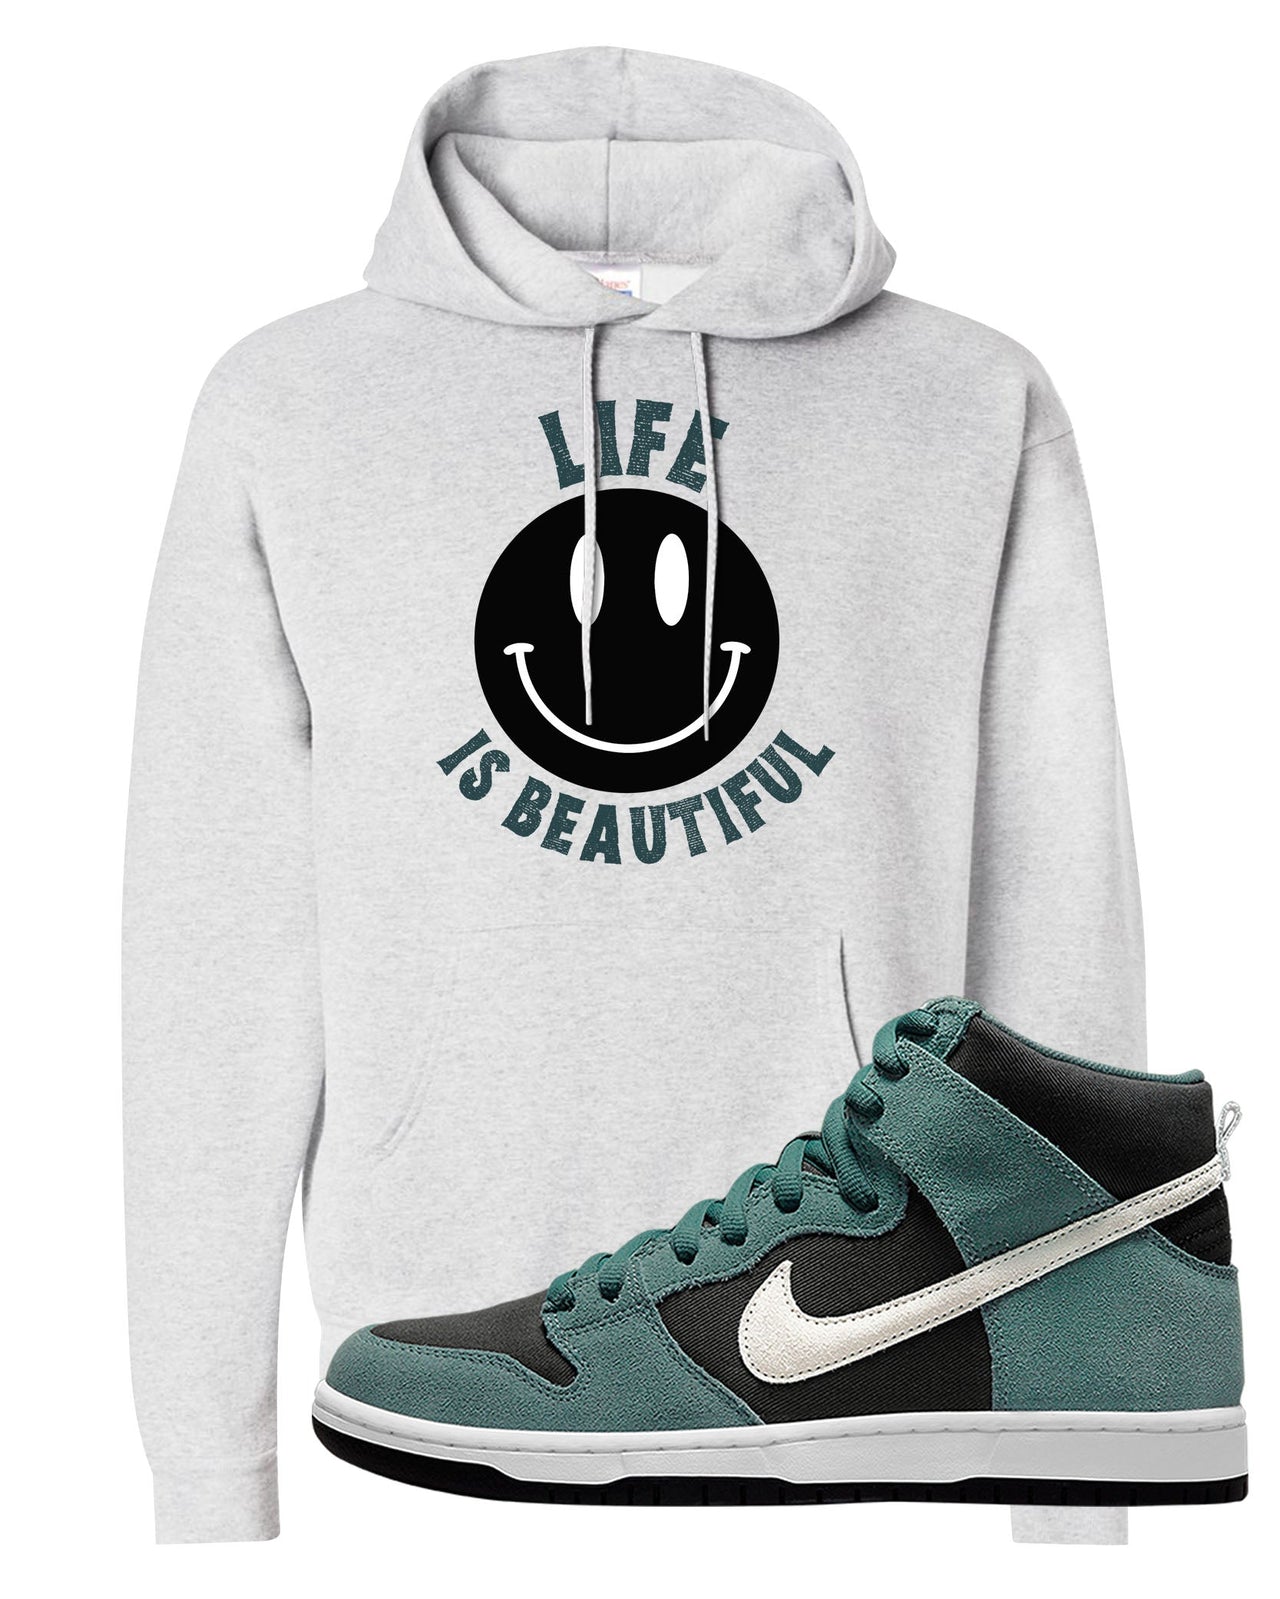 Green Suede High Dunks Hoodie | Smile Life Is Beautiful, Ash